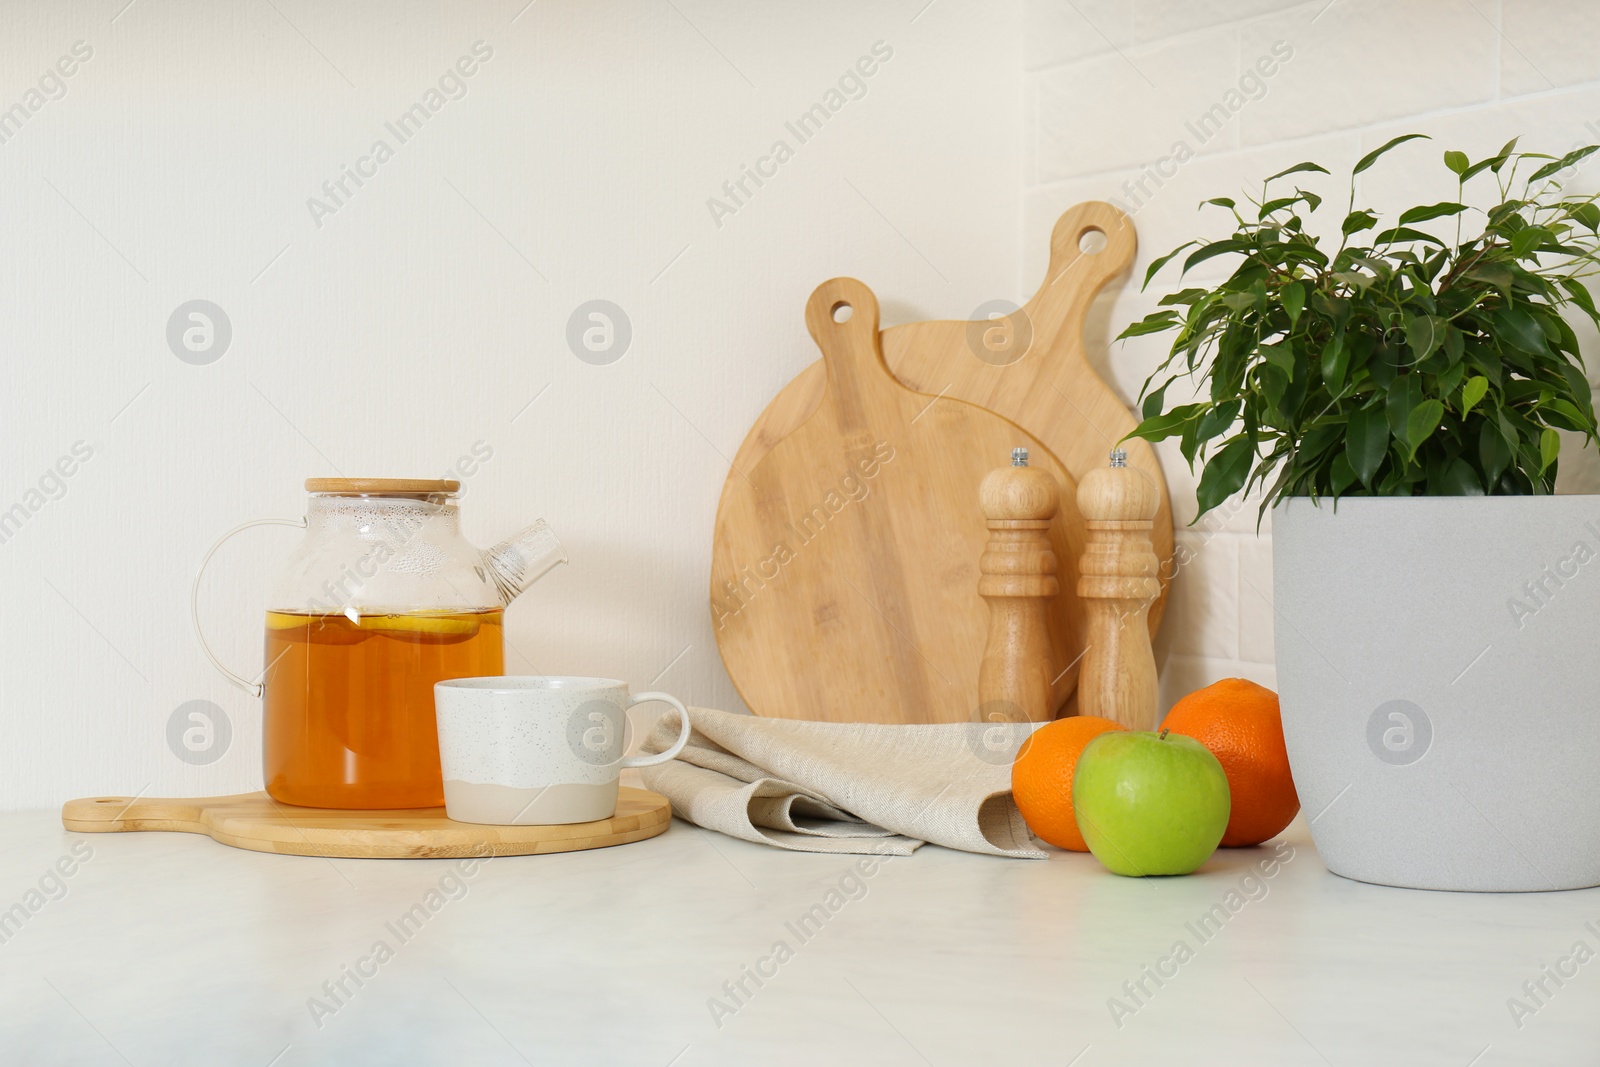 Photo of Different kitchen items and houseplant on countertop indoors